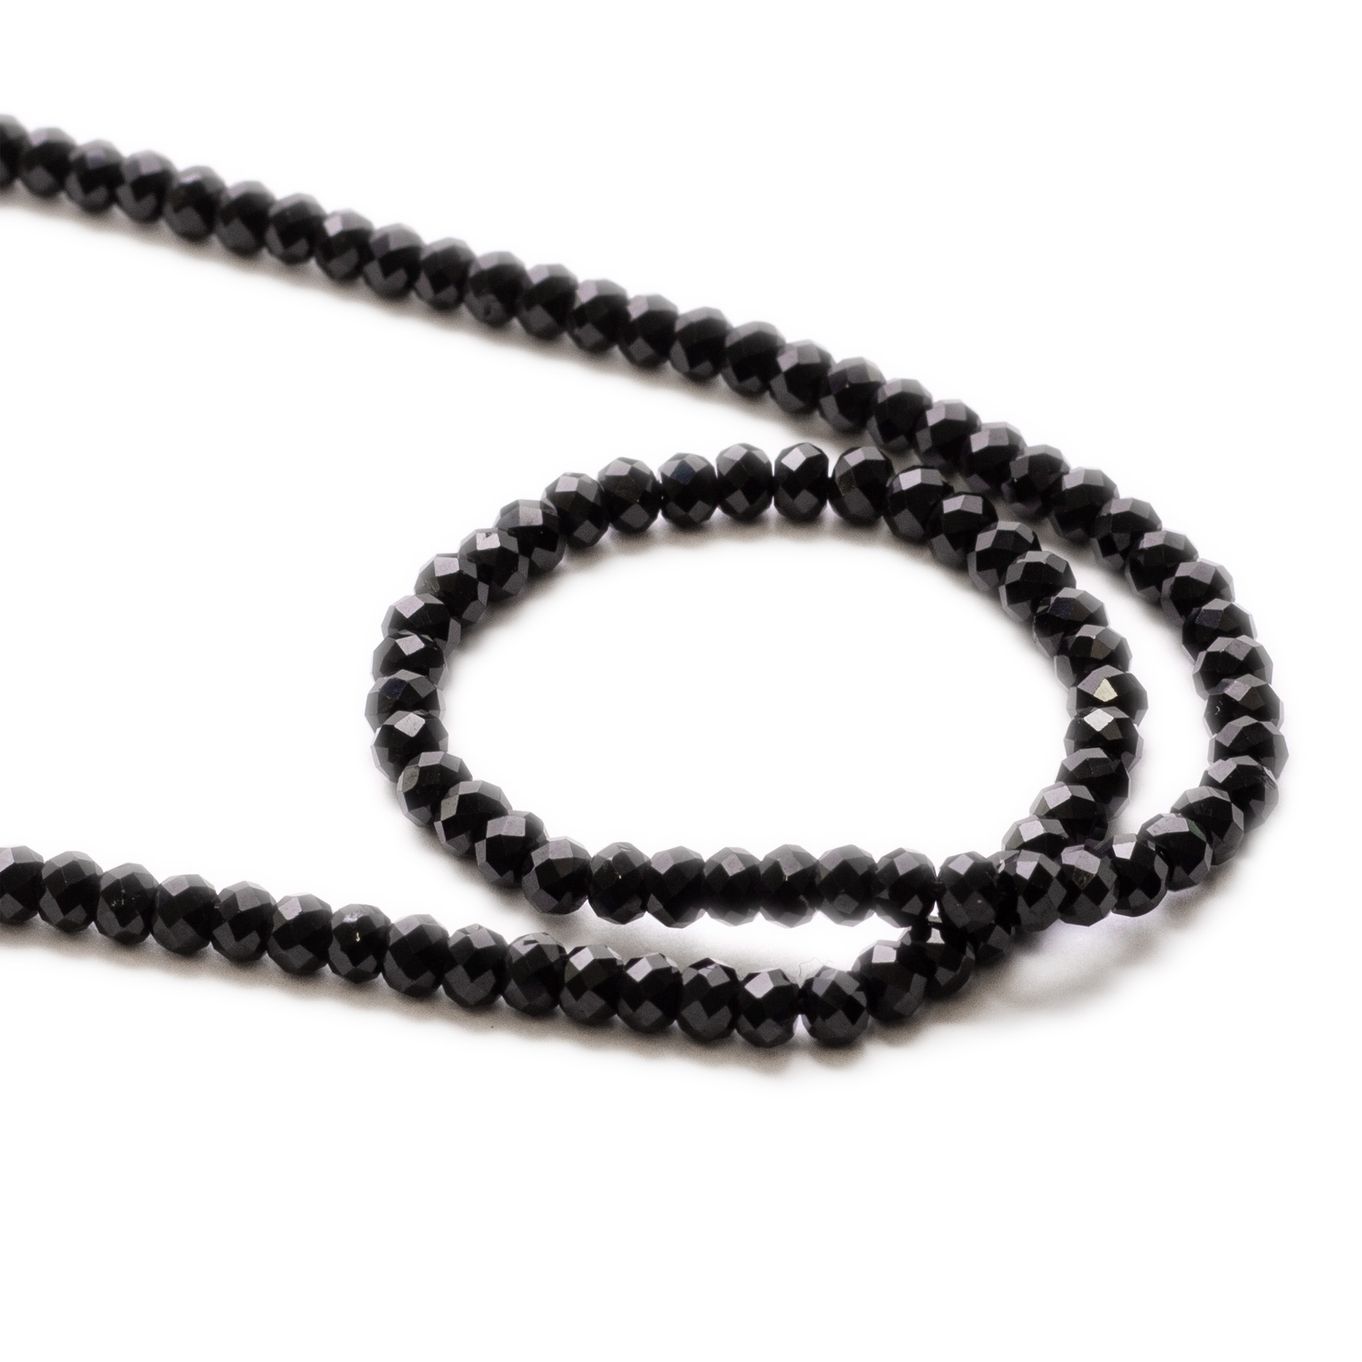 Black Spinel Faceted Rondelle Beads - Approx From 3mm